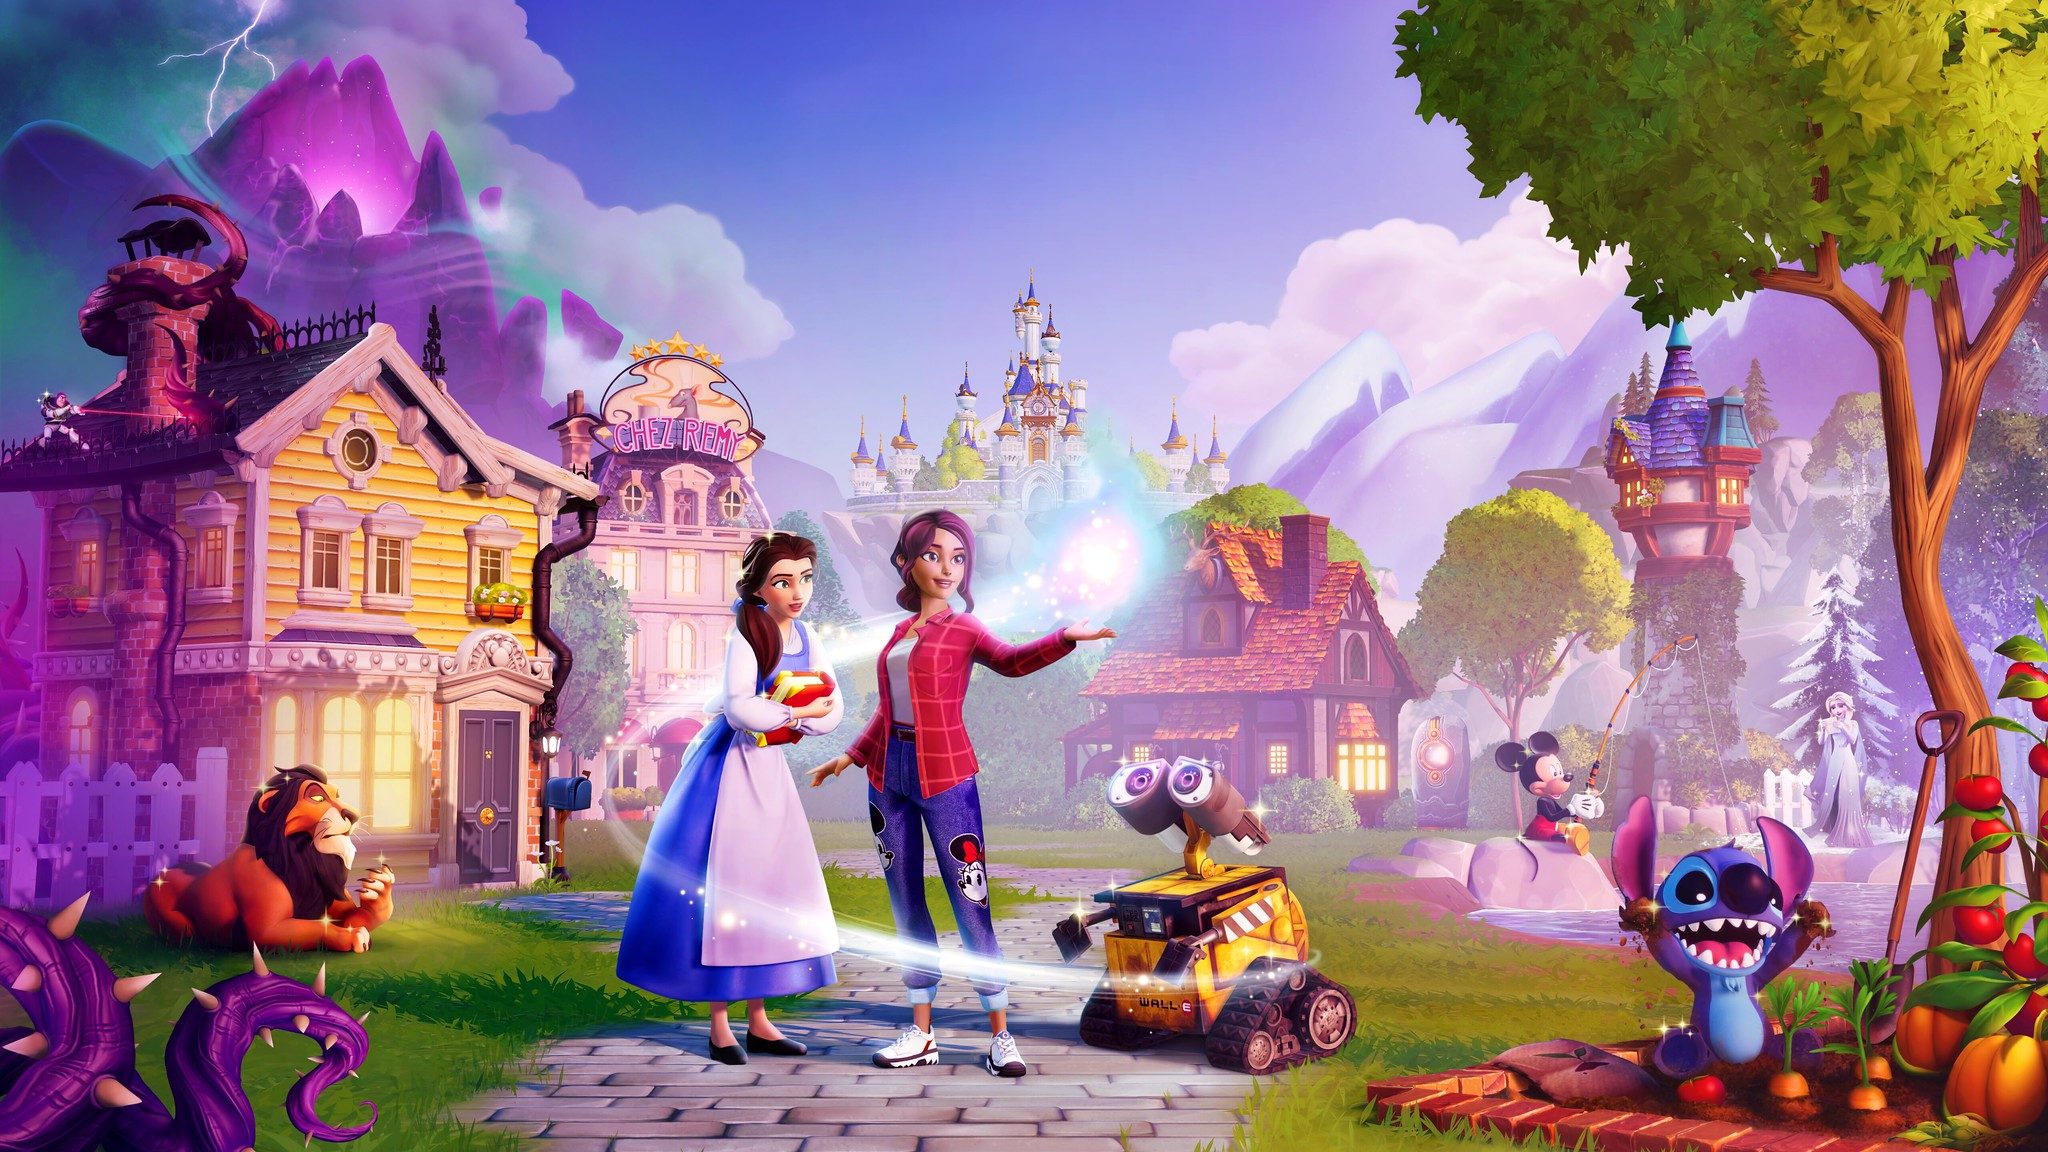 Disney Dreamlight Valley launches on PS5 and PS4 in 2022 Gamer Informers